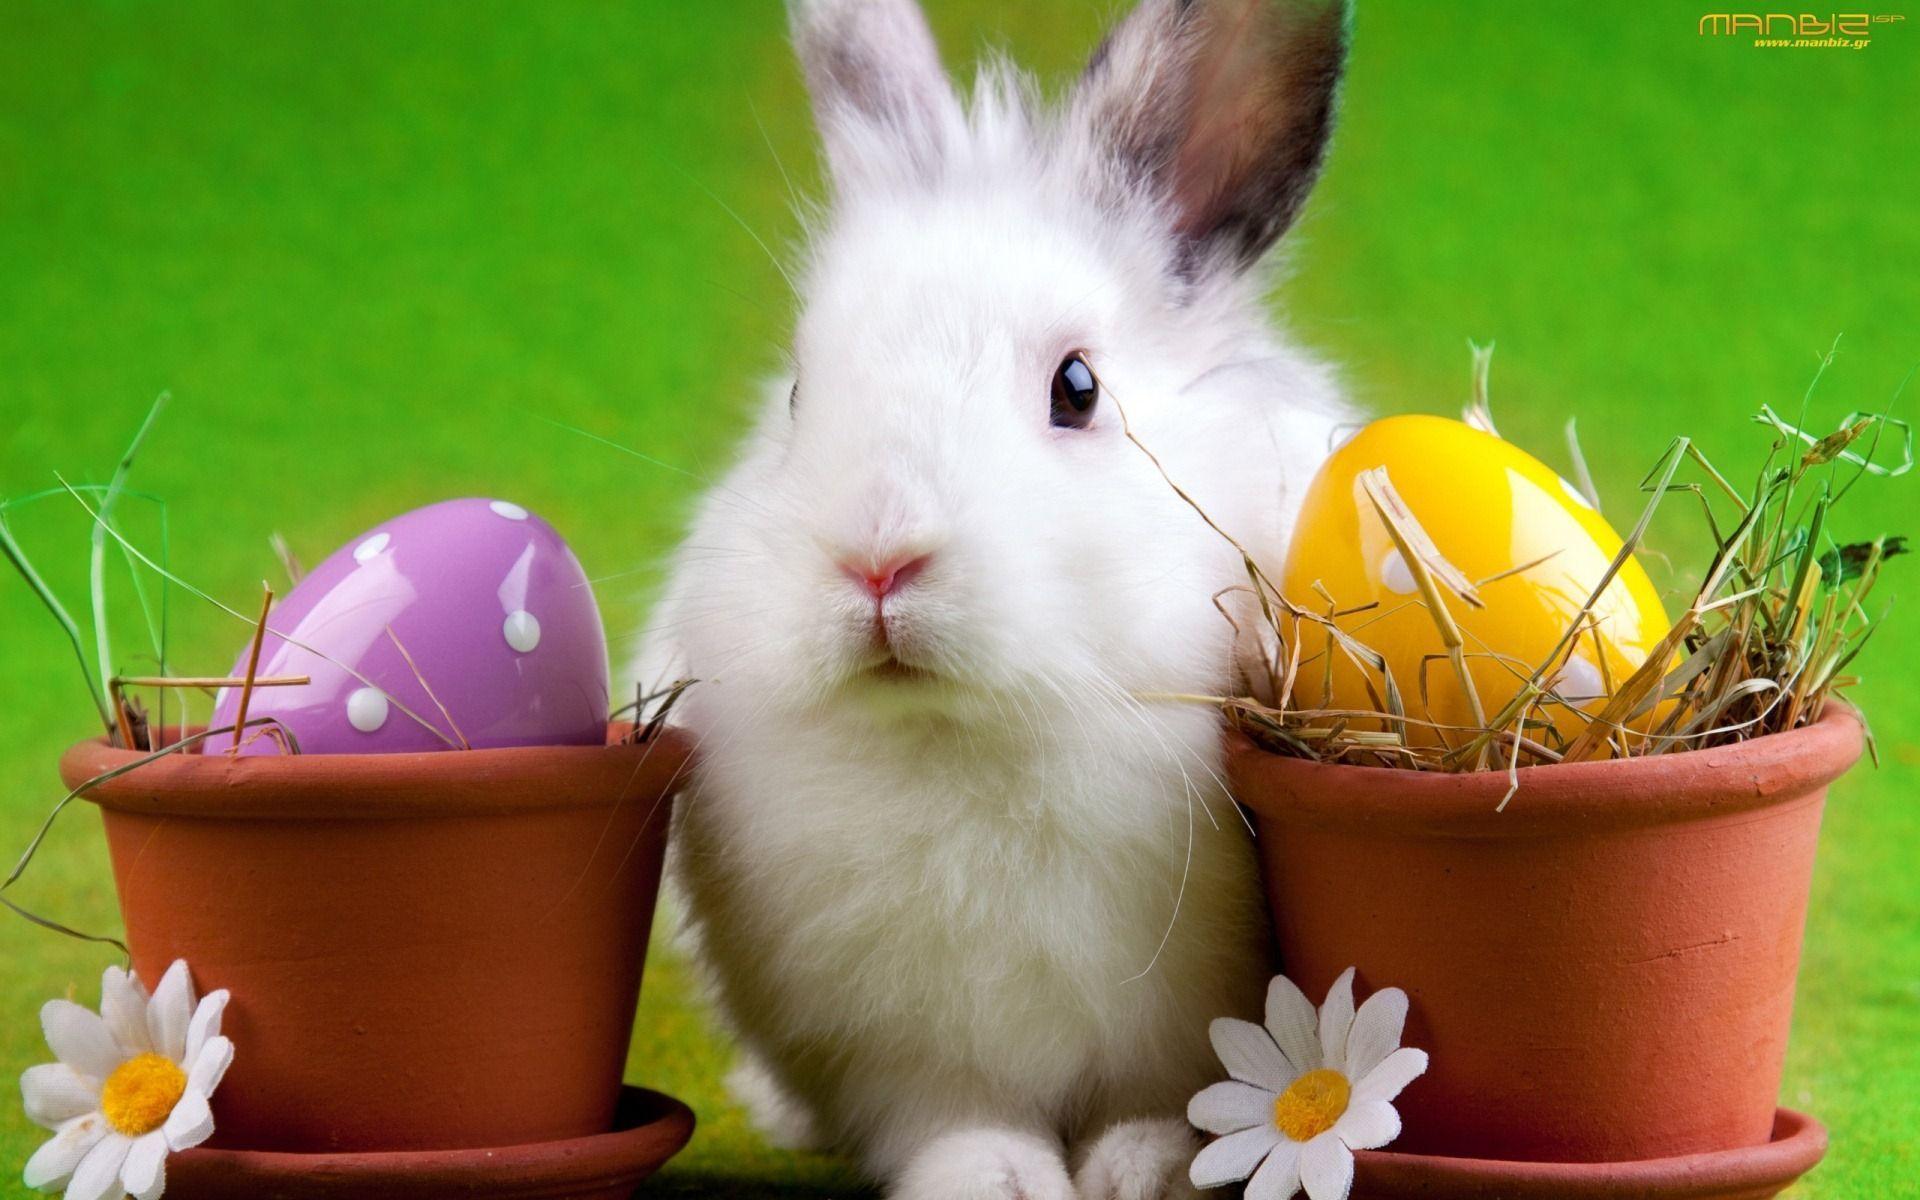 Easter Bunny Wallpaper Free Easter Bunny Background